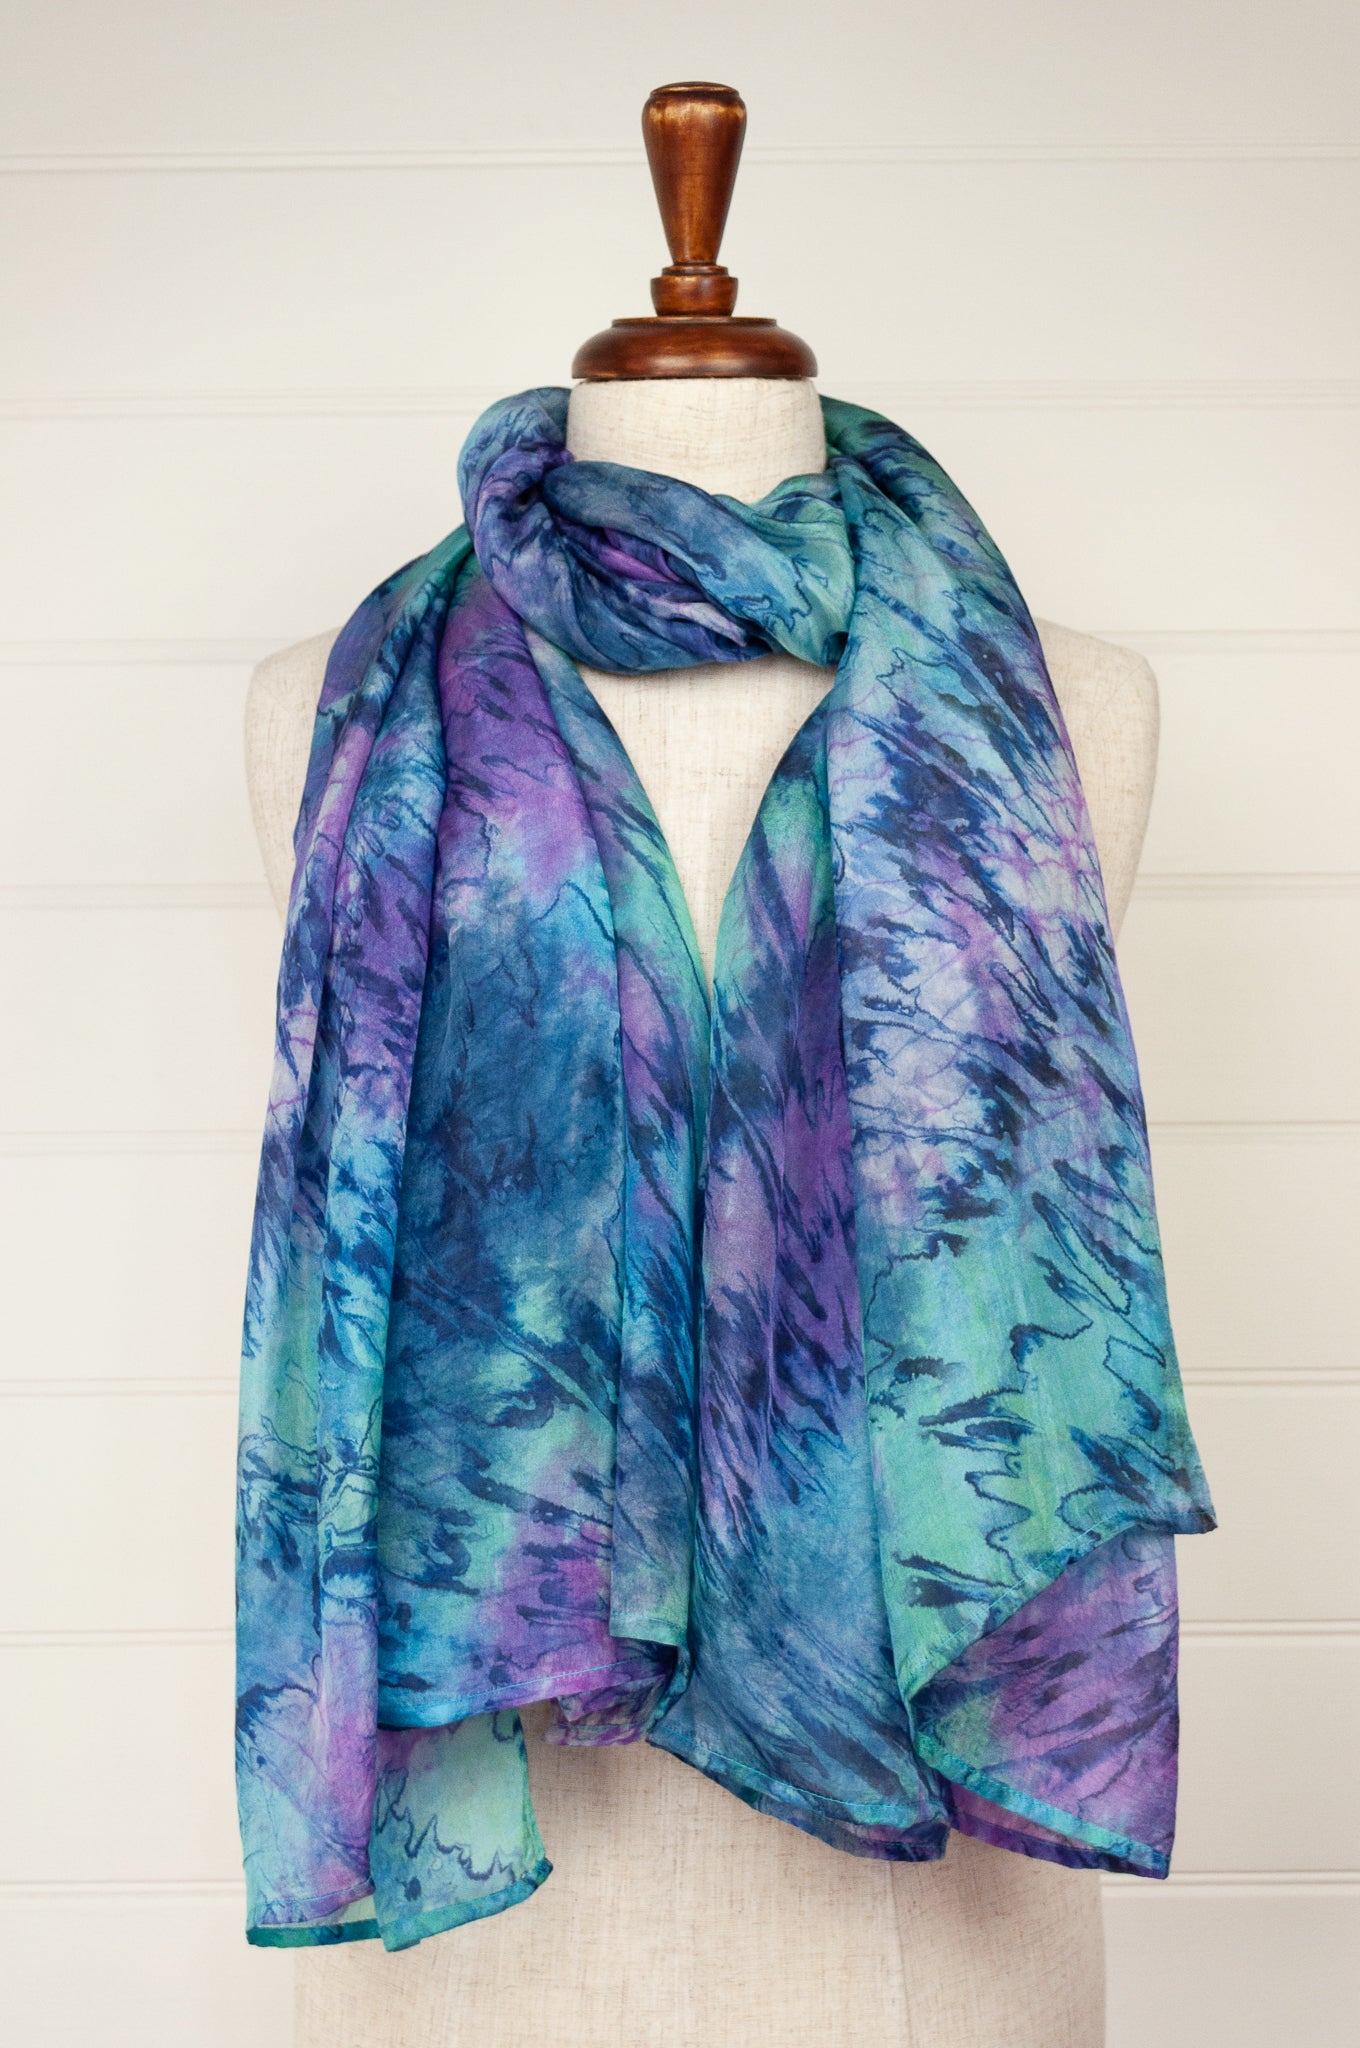 Digitally printed lightweight silk scarf in waterlily, shades of blue, mauve, lavender, aqua and teal.